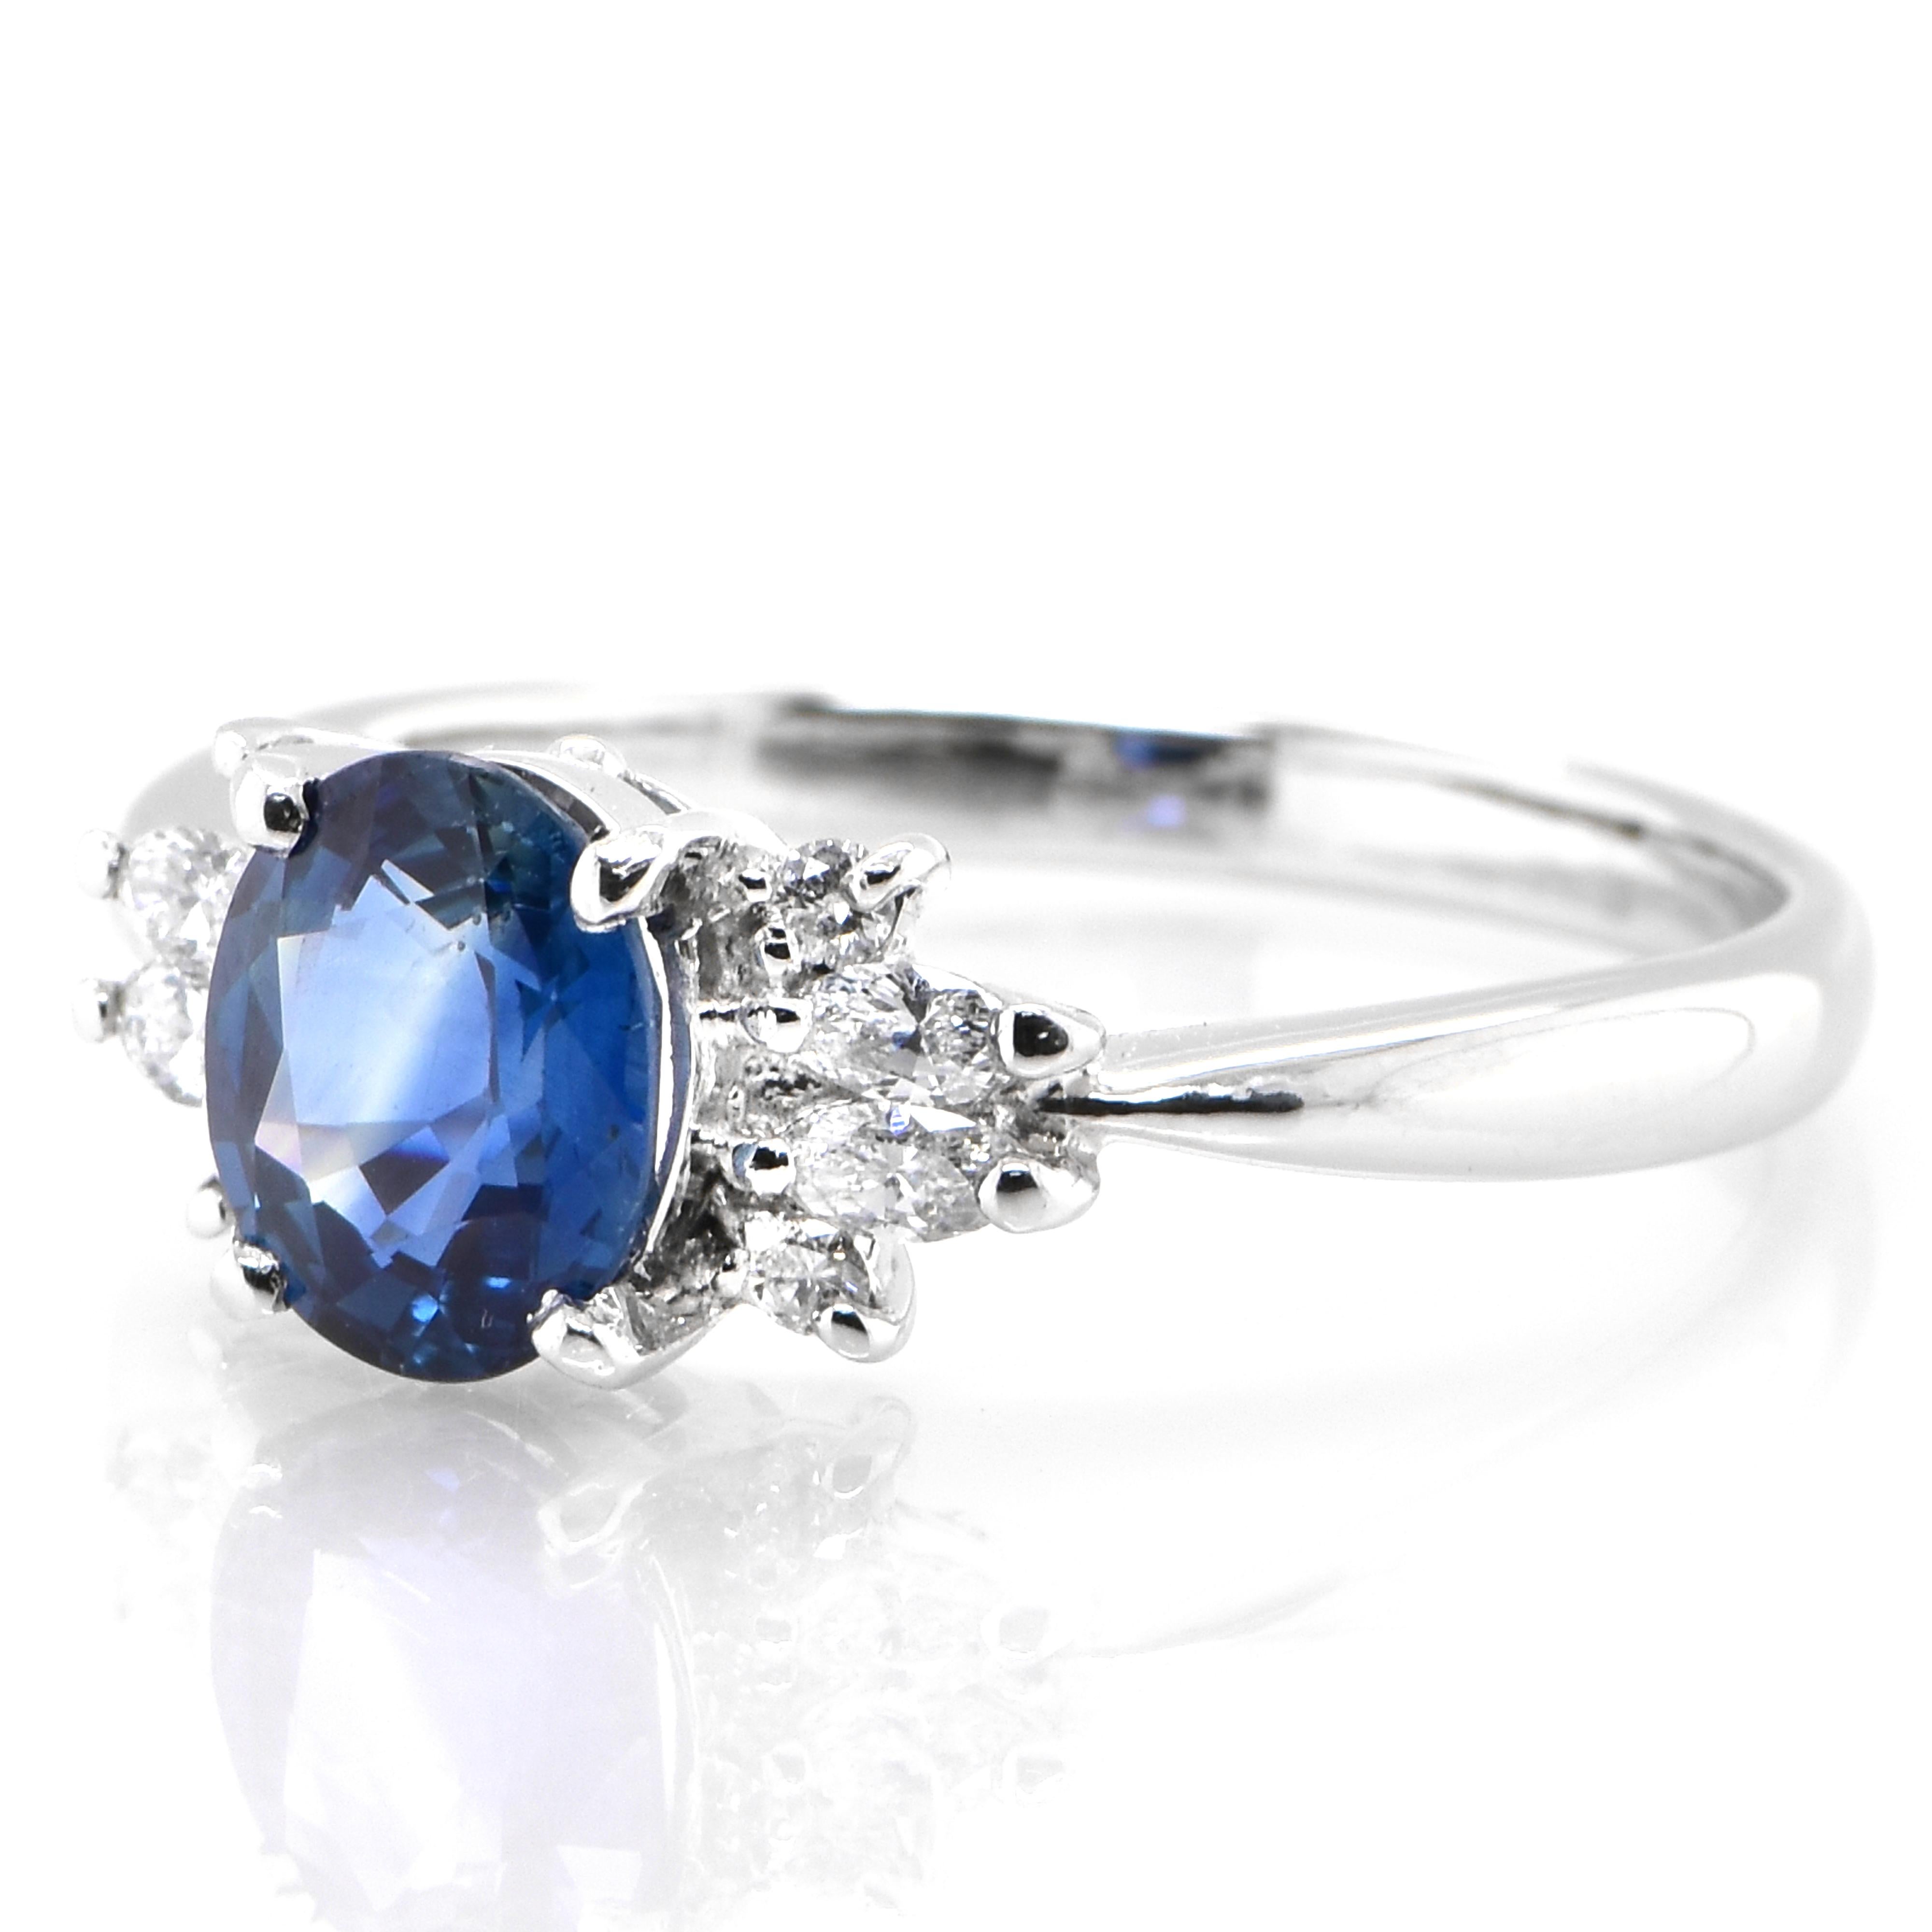 A beautiful ring featuring 1.61 Carat Natural Blue Sapphire and 0.23 Carats Diamond Accents set in Platinum. Sapphires have extraordinary durability - they excel in hardness as well as toughness and durability making them very popular in jewelry.